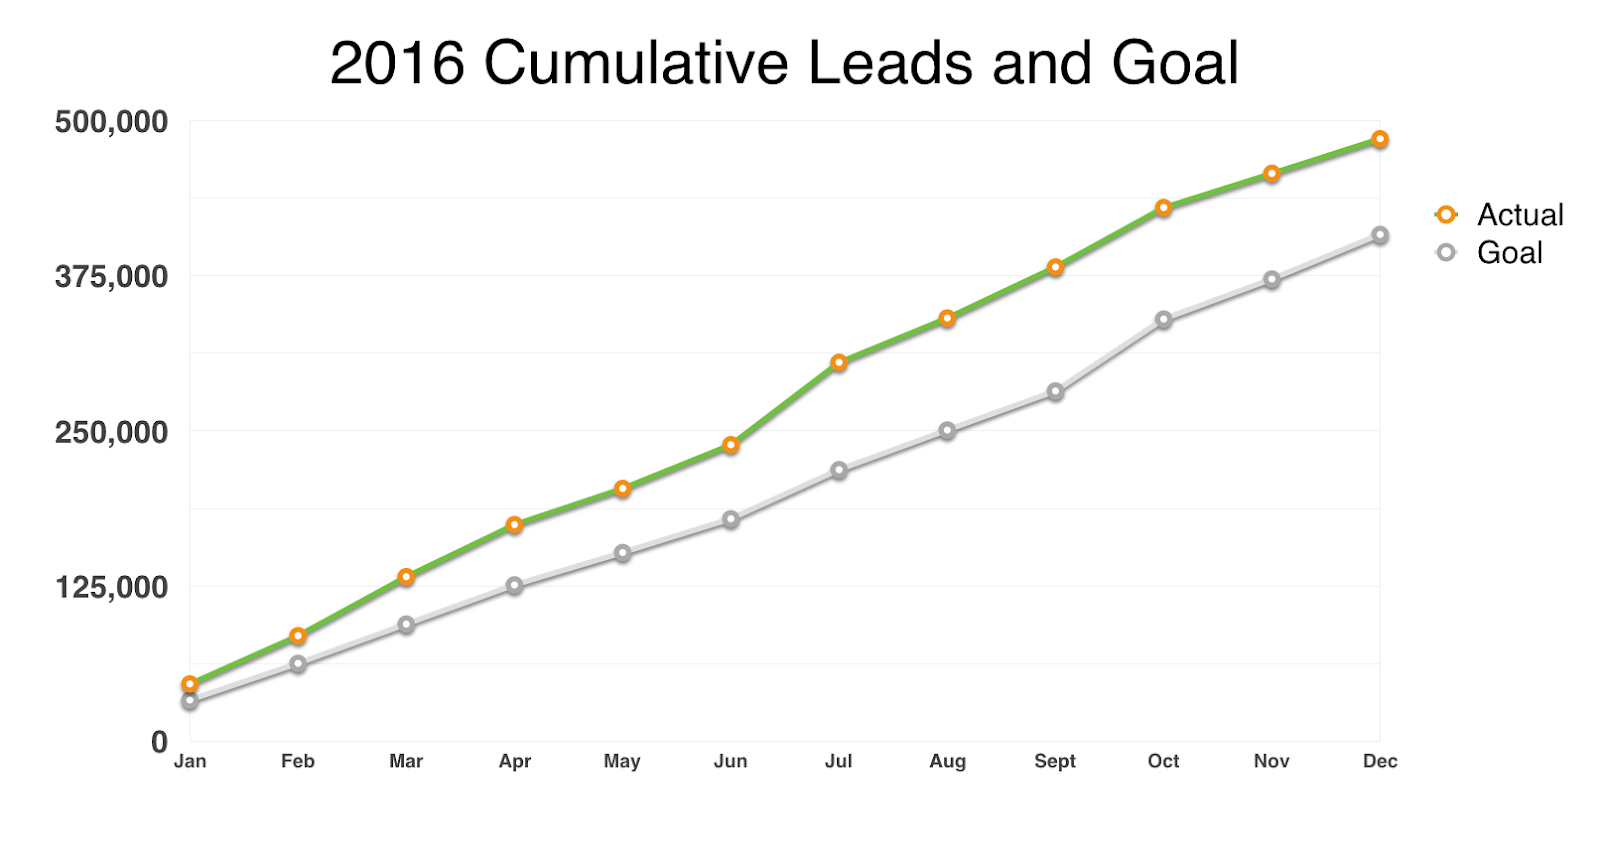 Screenshot of I Will Teach You To Be Rich's cumulative leads volume compared to the goal of the year